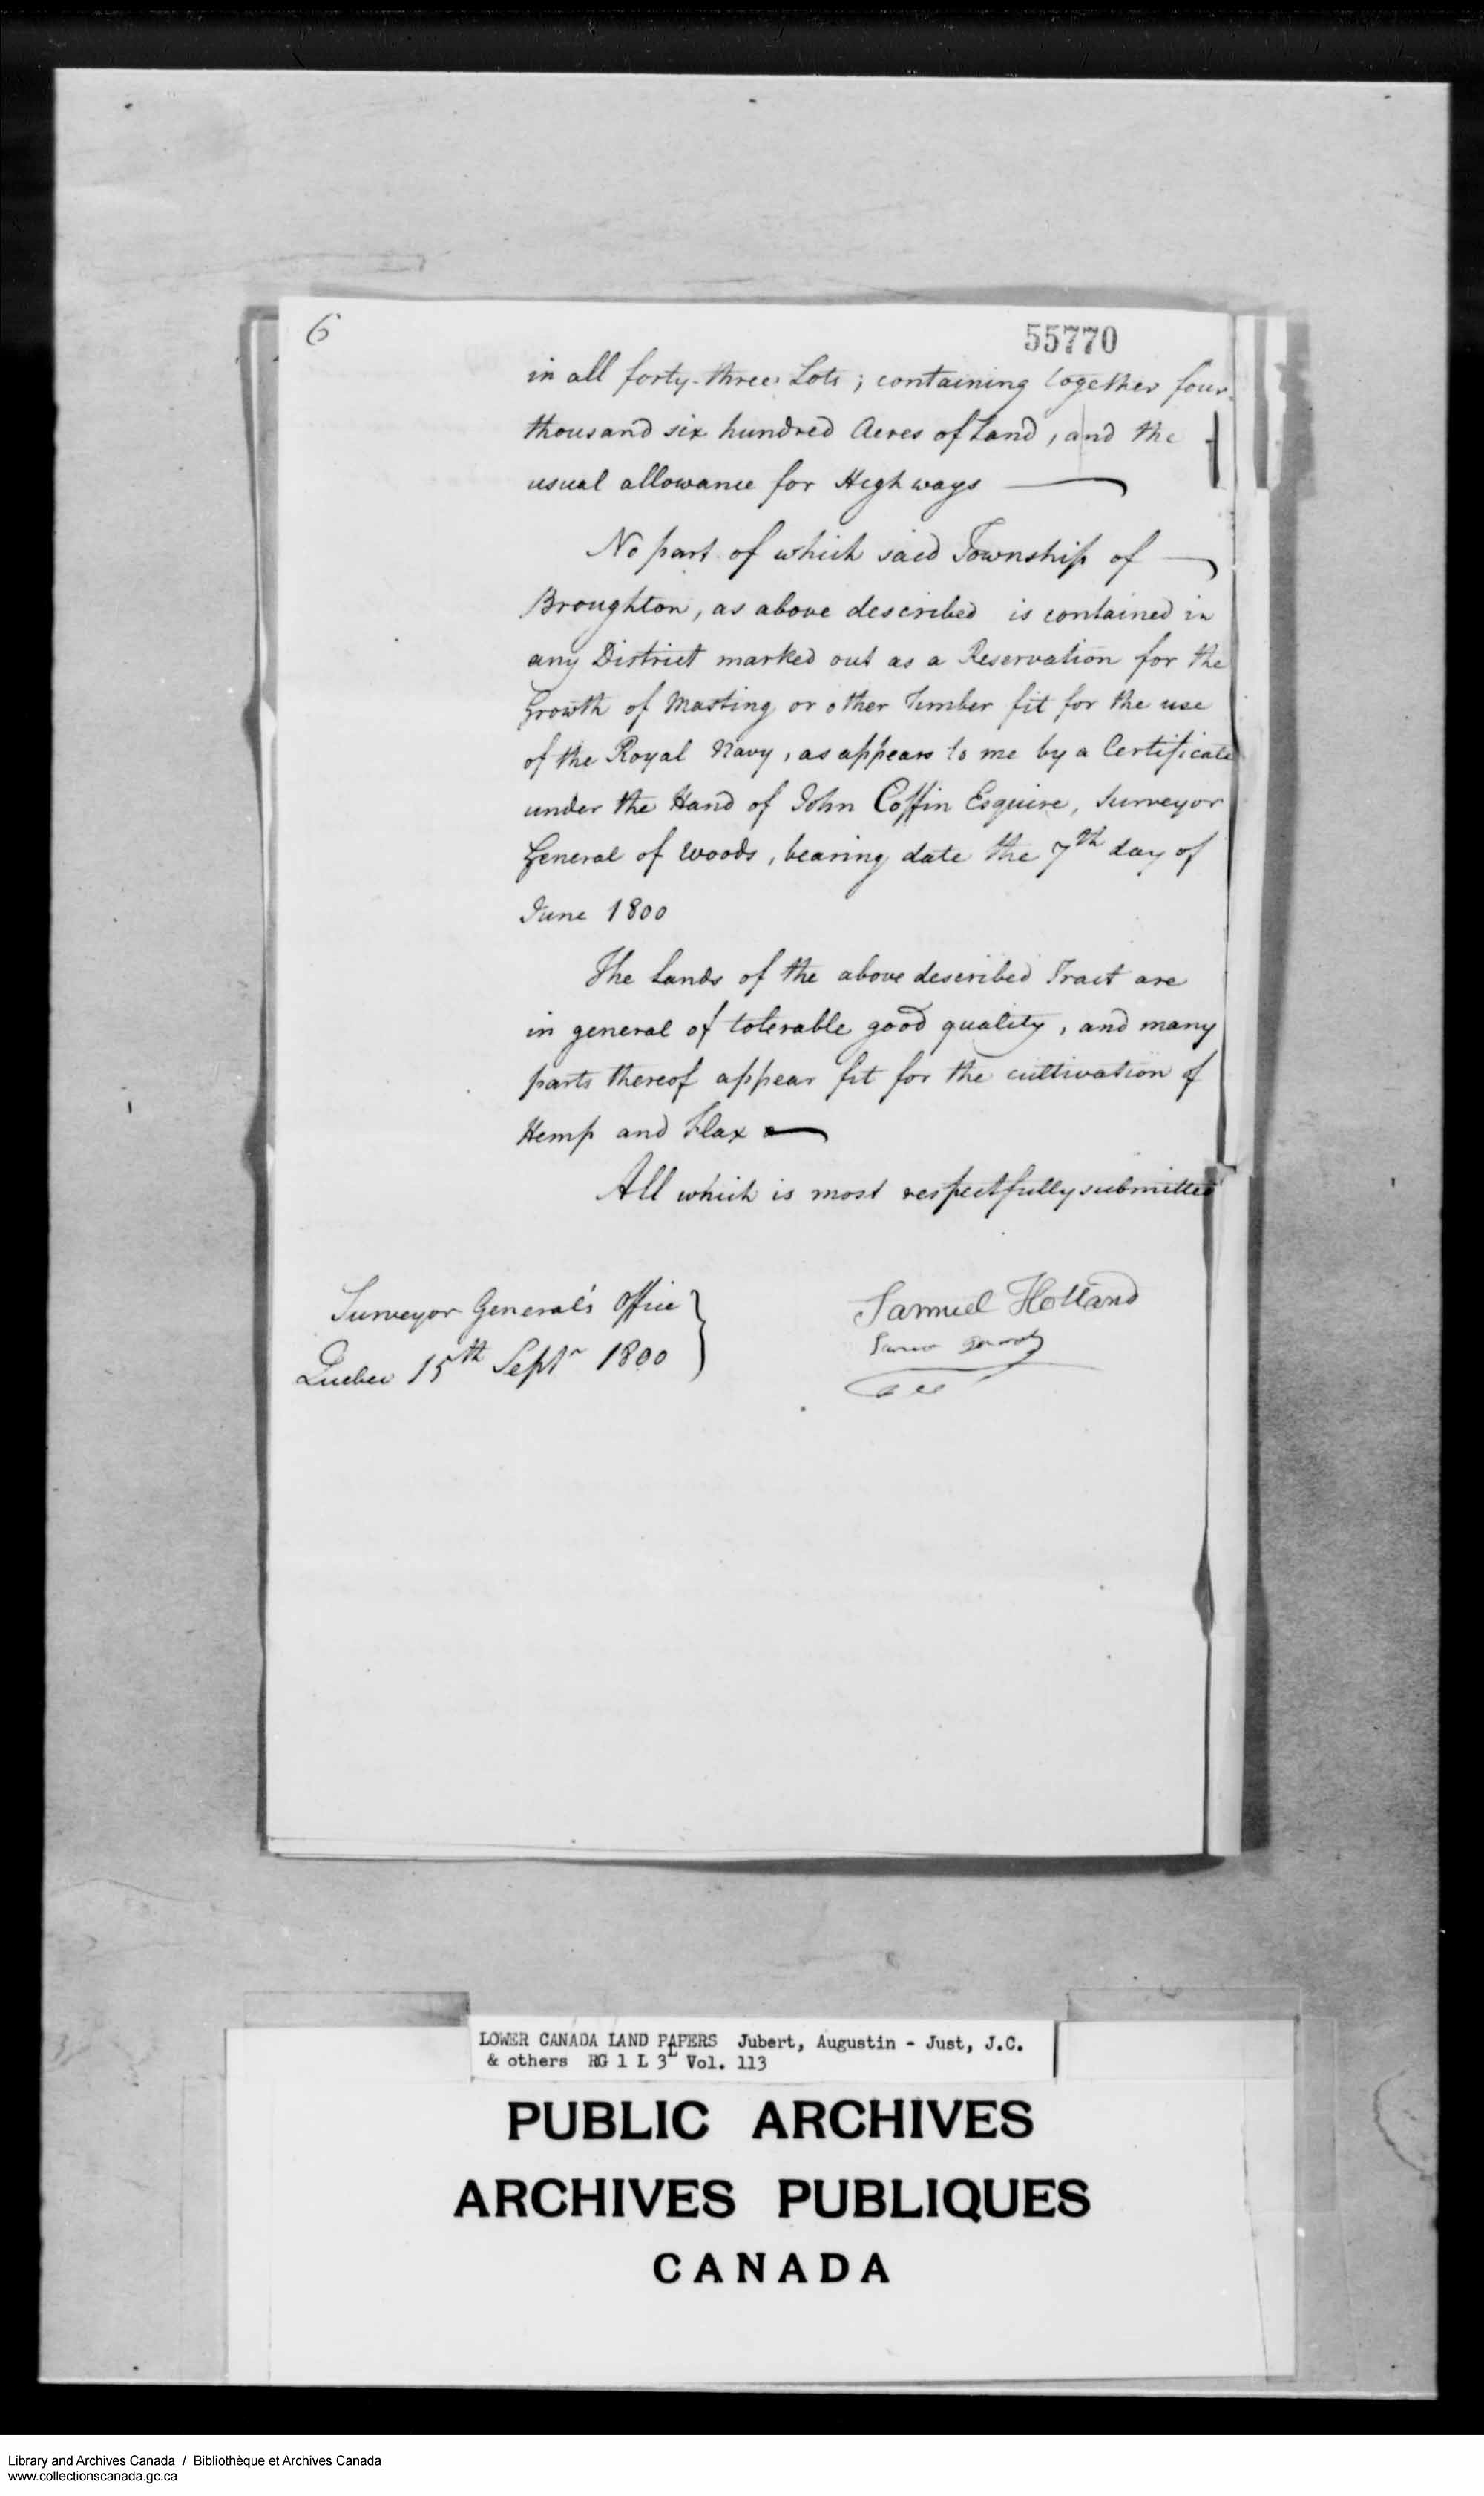 Digitized page of  for Image No.: e008700258